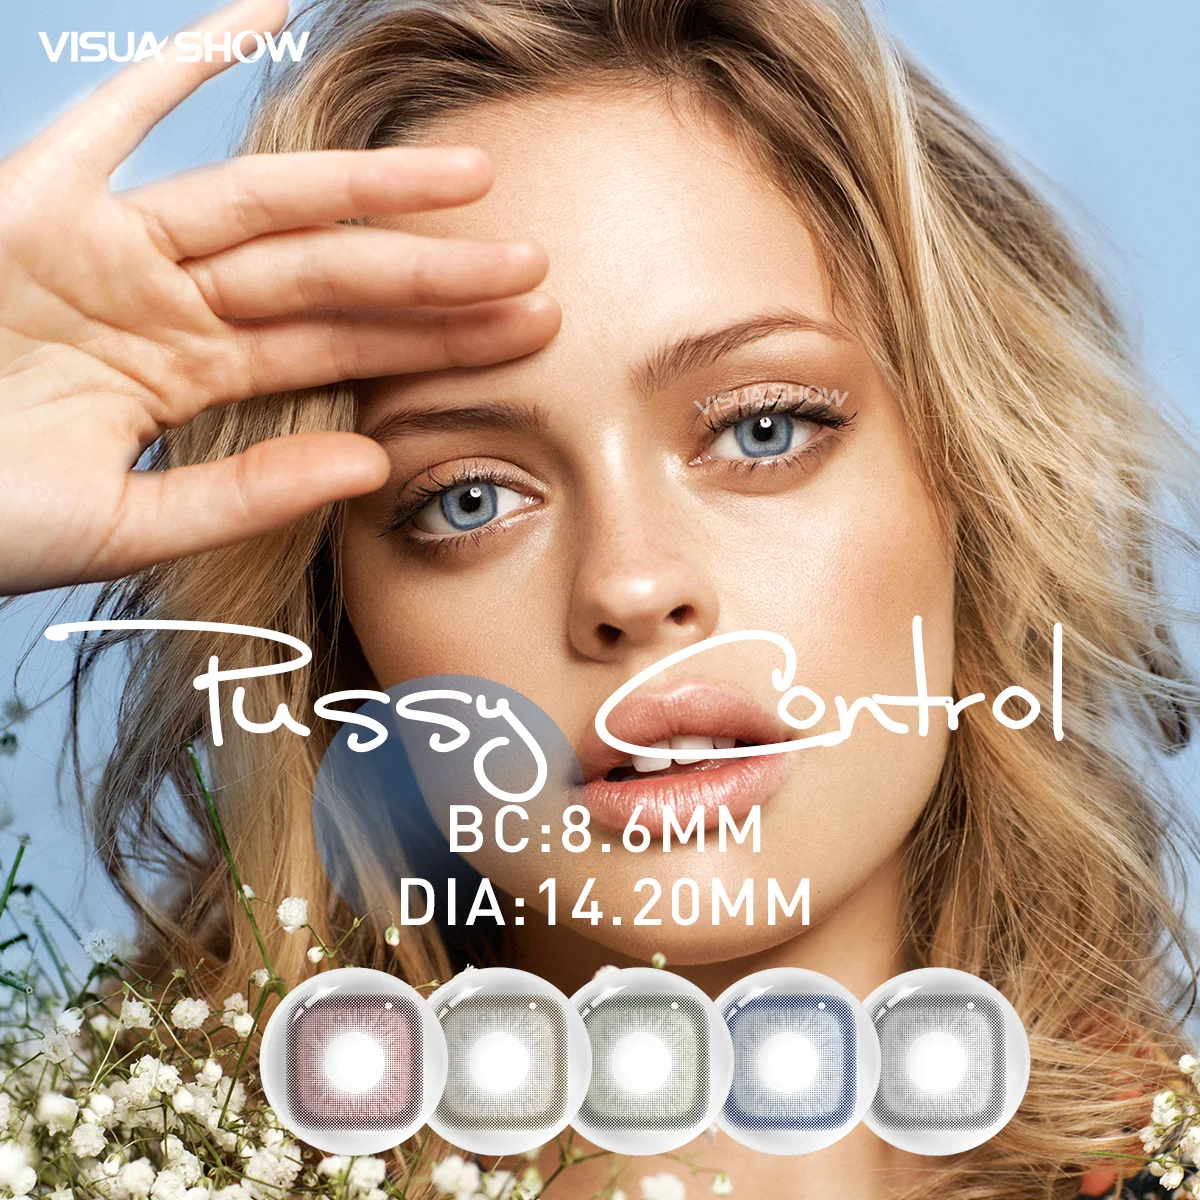 

VISUASHOW Pussy Control Natural Color Lens Myopia Contact Lenses -1.00 to -8.00 2pcs Beauty Contact Lenses Yearly Lens